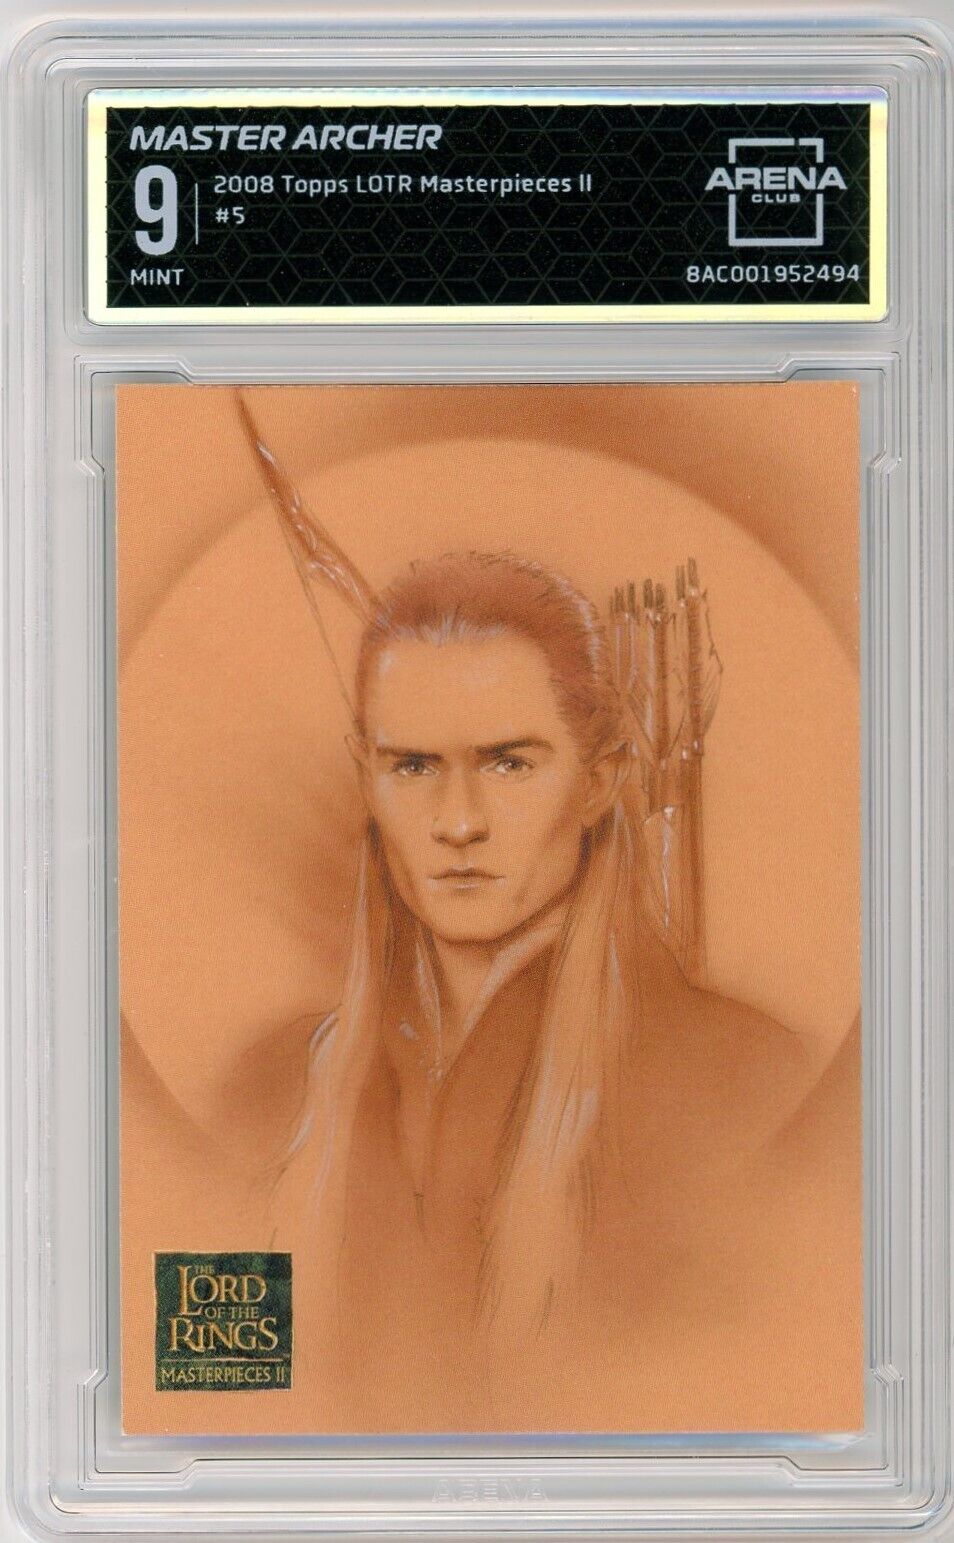 2008 Topps The Lord of the Rings #5 Master Archer Legolas Arena Club 9 Mint